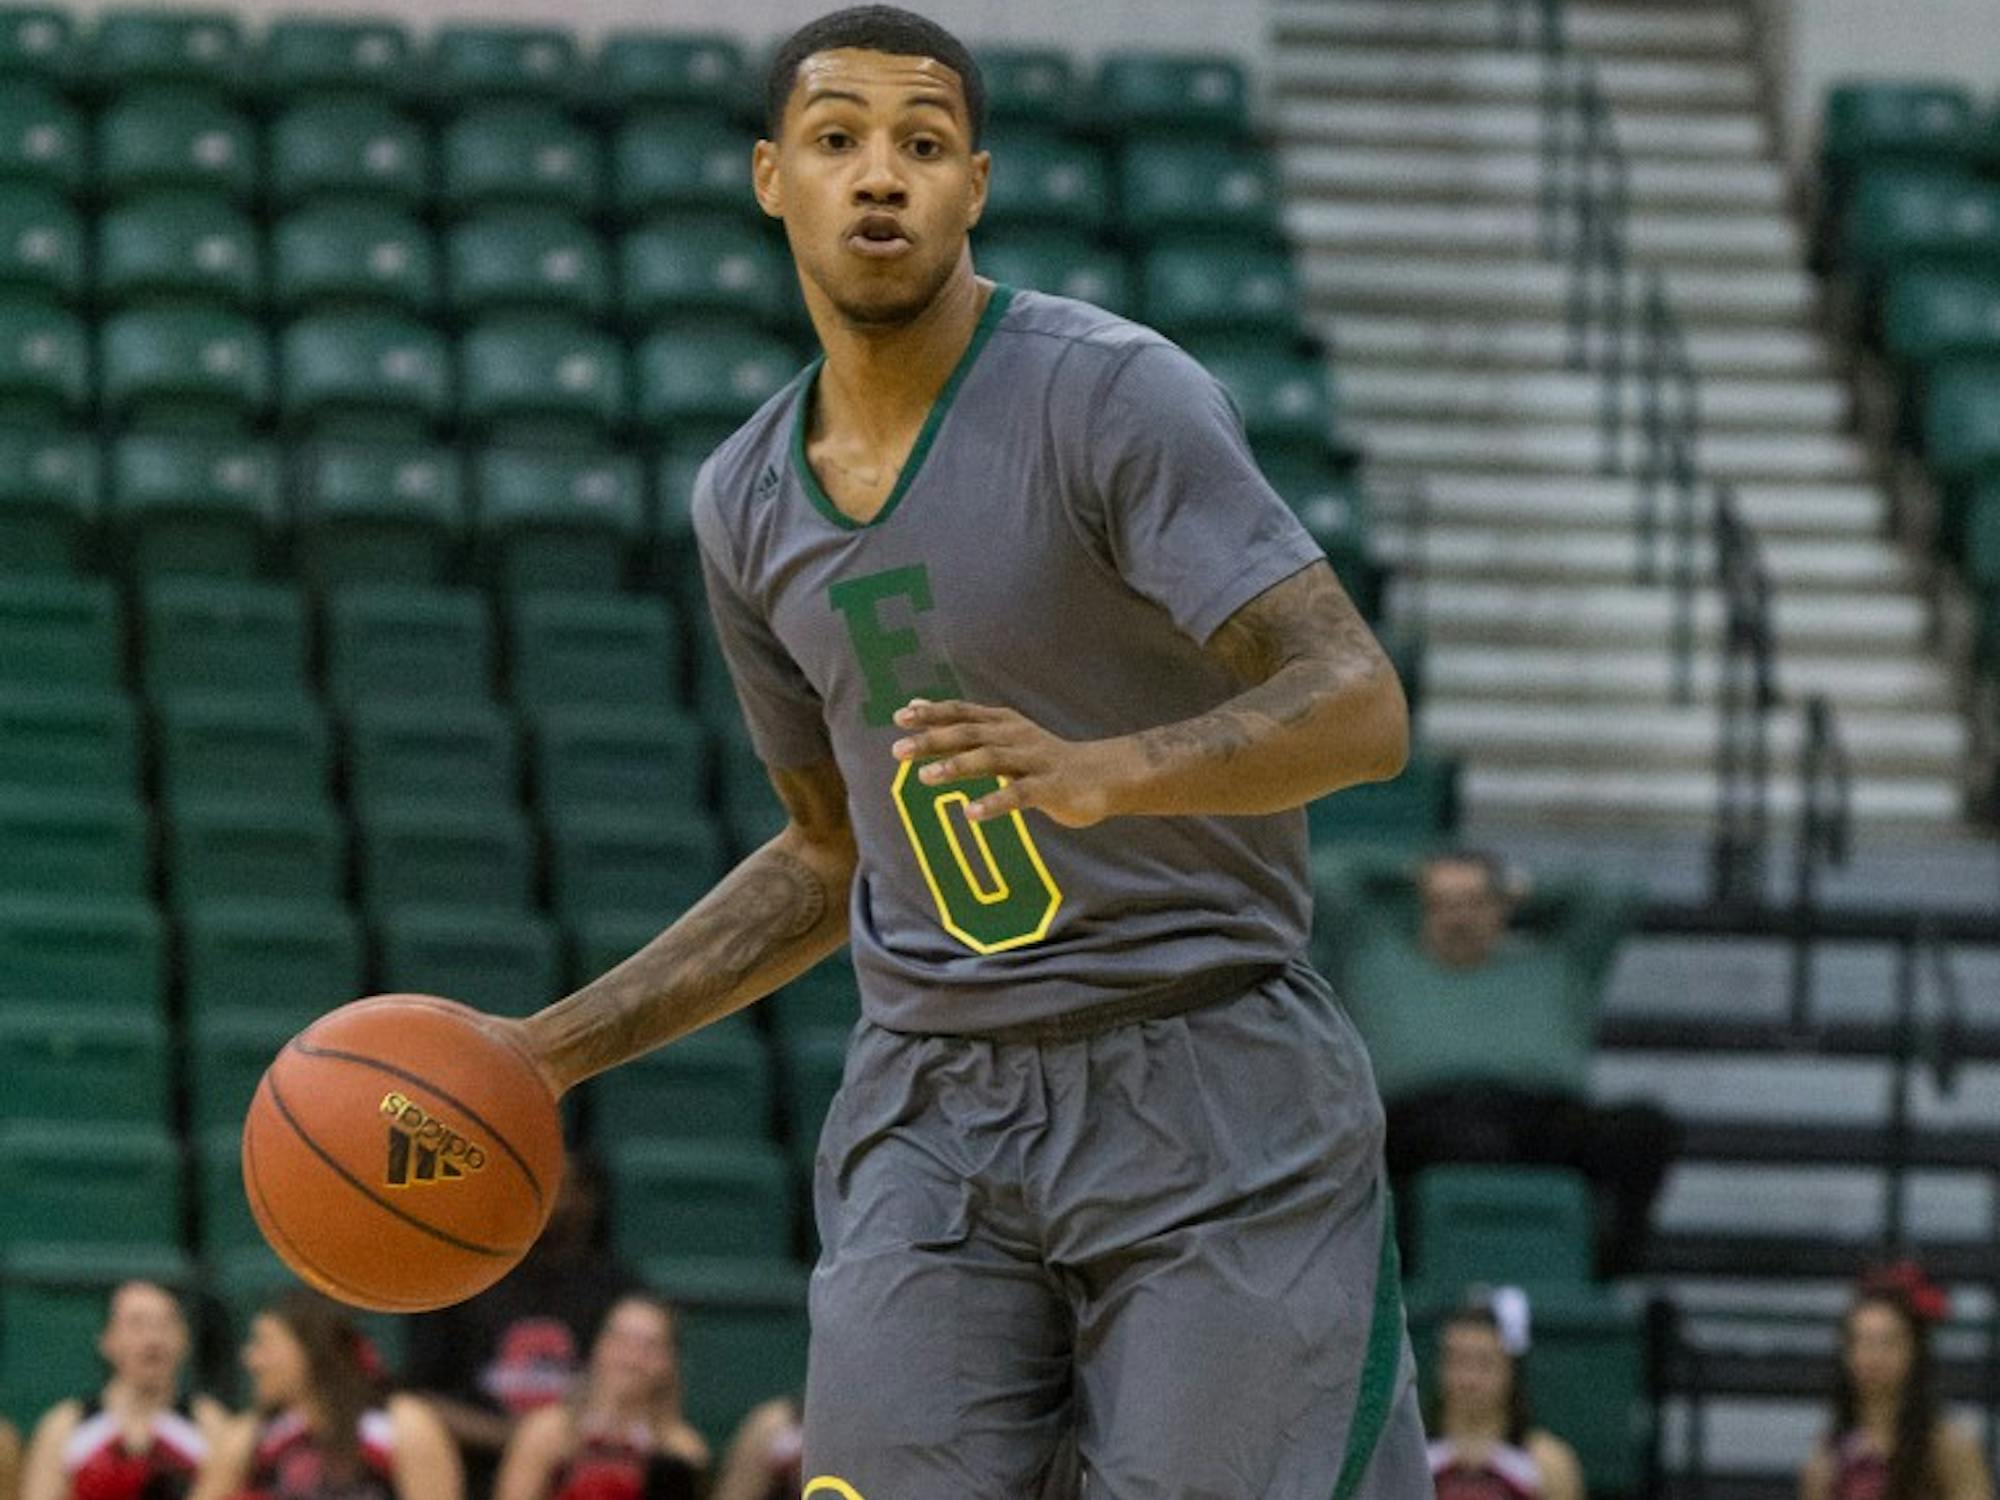 EMU guard Ray Lee had 12 points in Eastern Michigan's 95-50 win over Concordia Tuesday night.